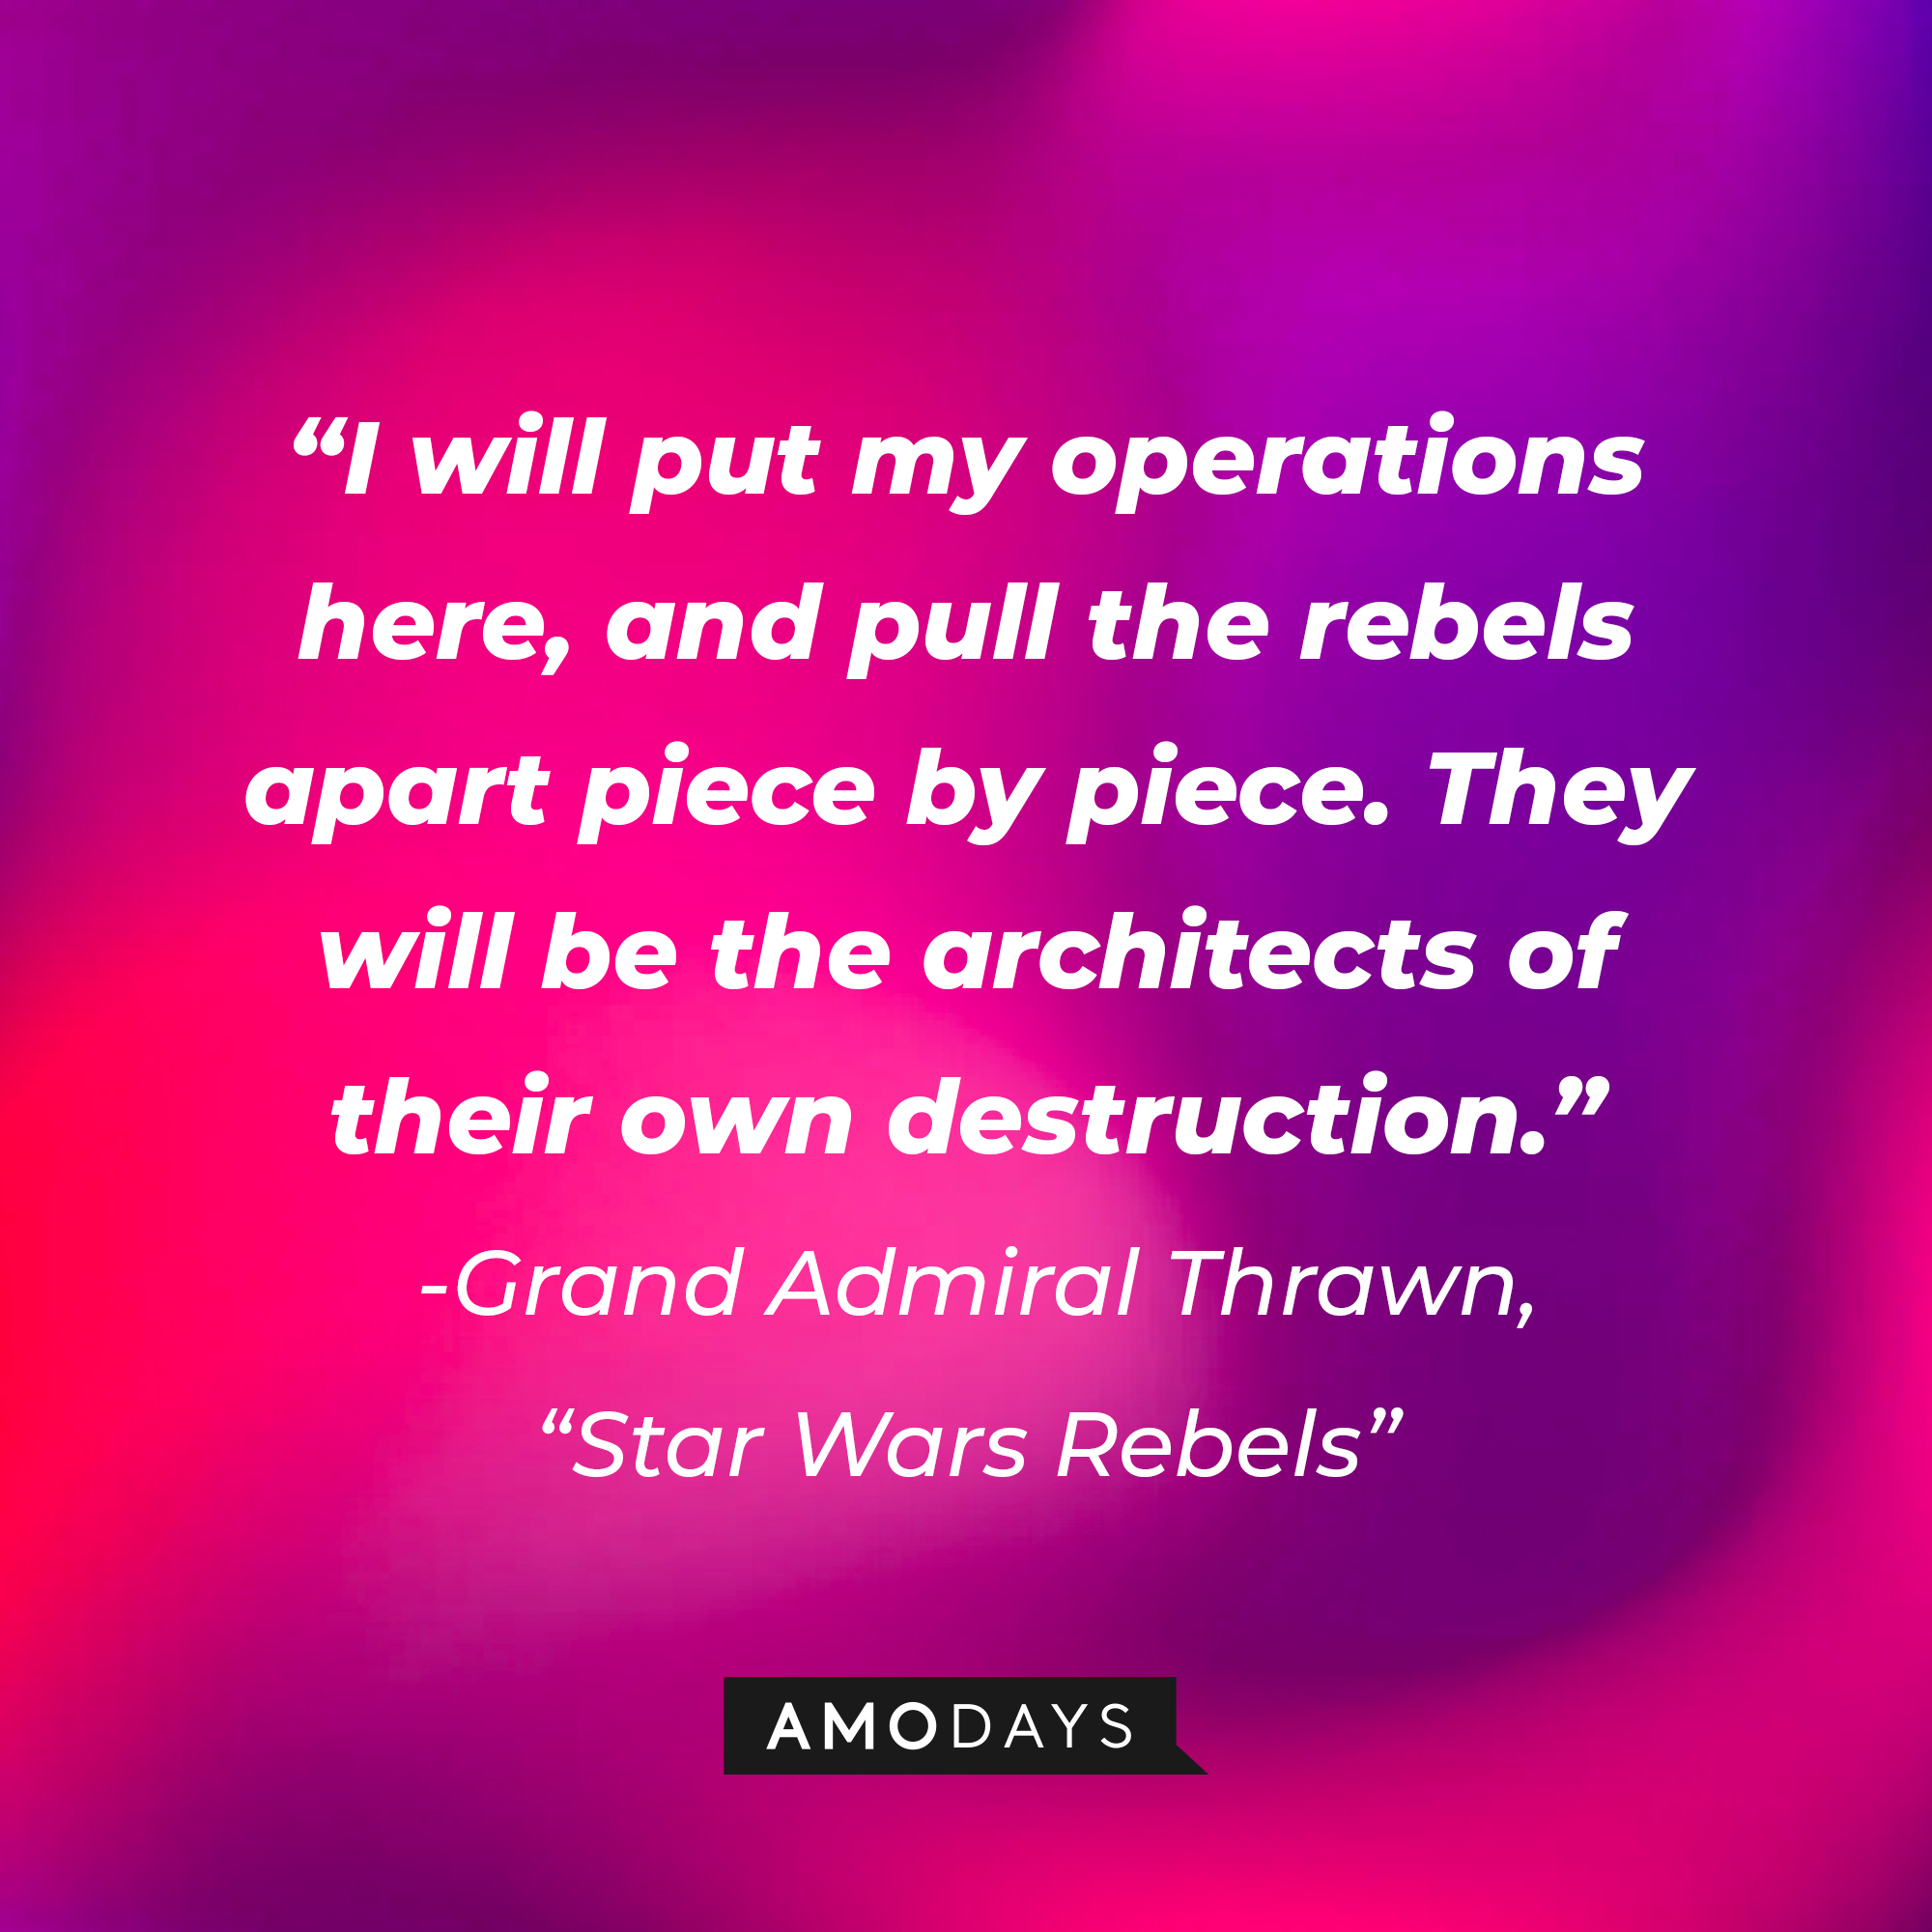 Grand Admiral Thrawn's quote: "I will put my operations here, and pull the rebels apart piece by piece. They will be the architects of their own destruction." | Source: AmoDays